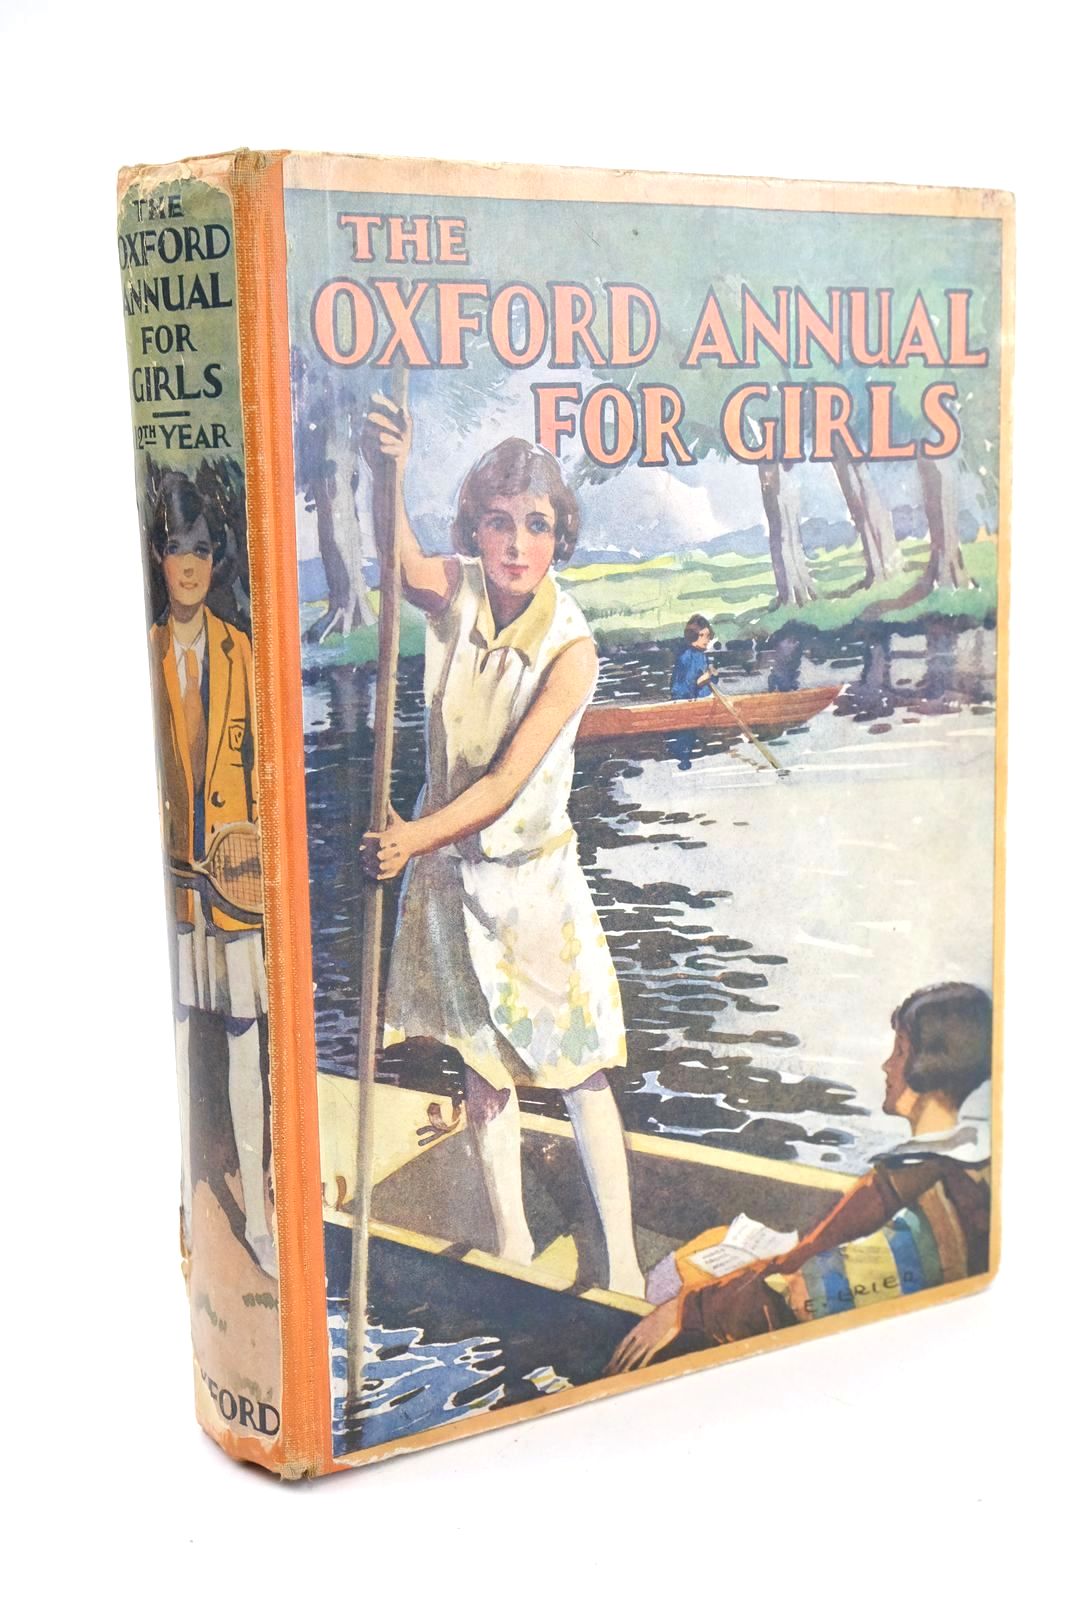 Photo of THE OXFORD ANNUAL FOR GIRLS 12TH YEAR written by Plunket, Ierne L. Rutley, C. Bernard Pye, Virginia et al, illustrated by Johnston, M.D. Brock, C.E. et al., published by Oxford University Press, Humphrey Milford (STOCK CODE: 1324770)  for sale by Stella & Rose's Books